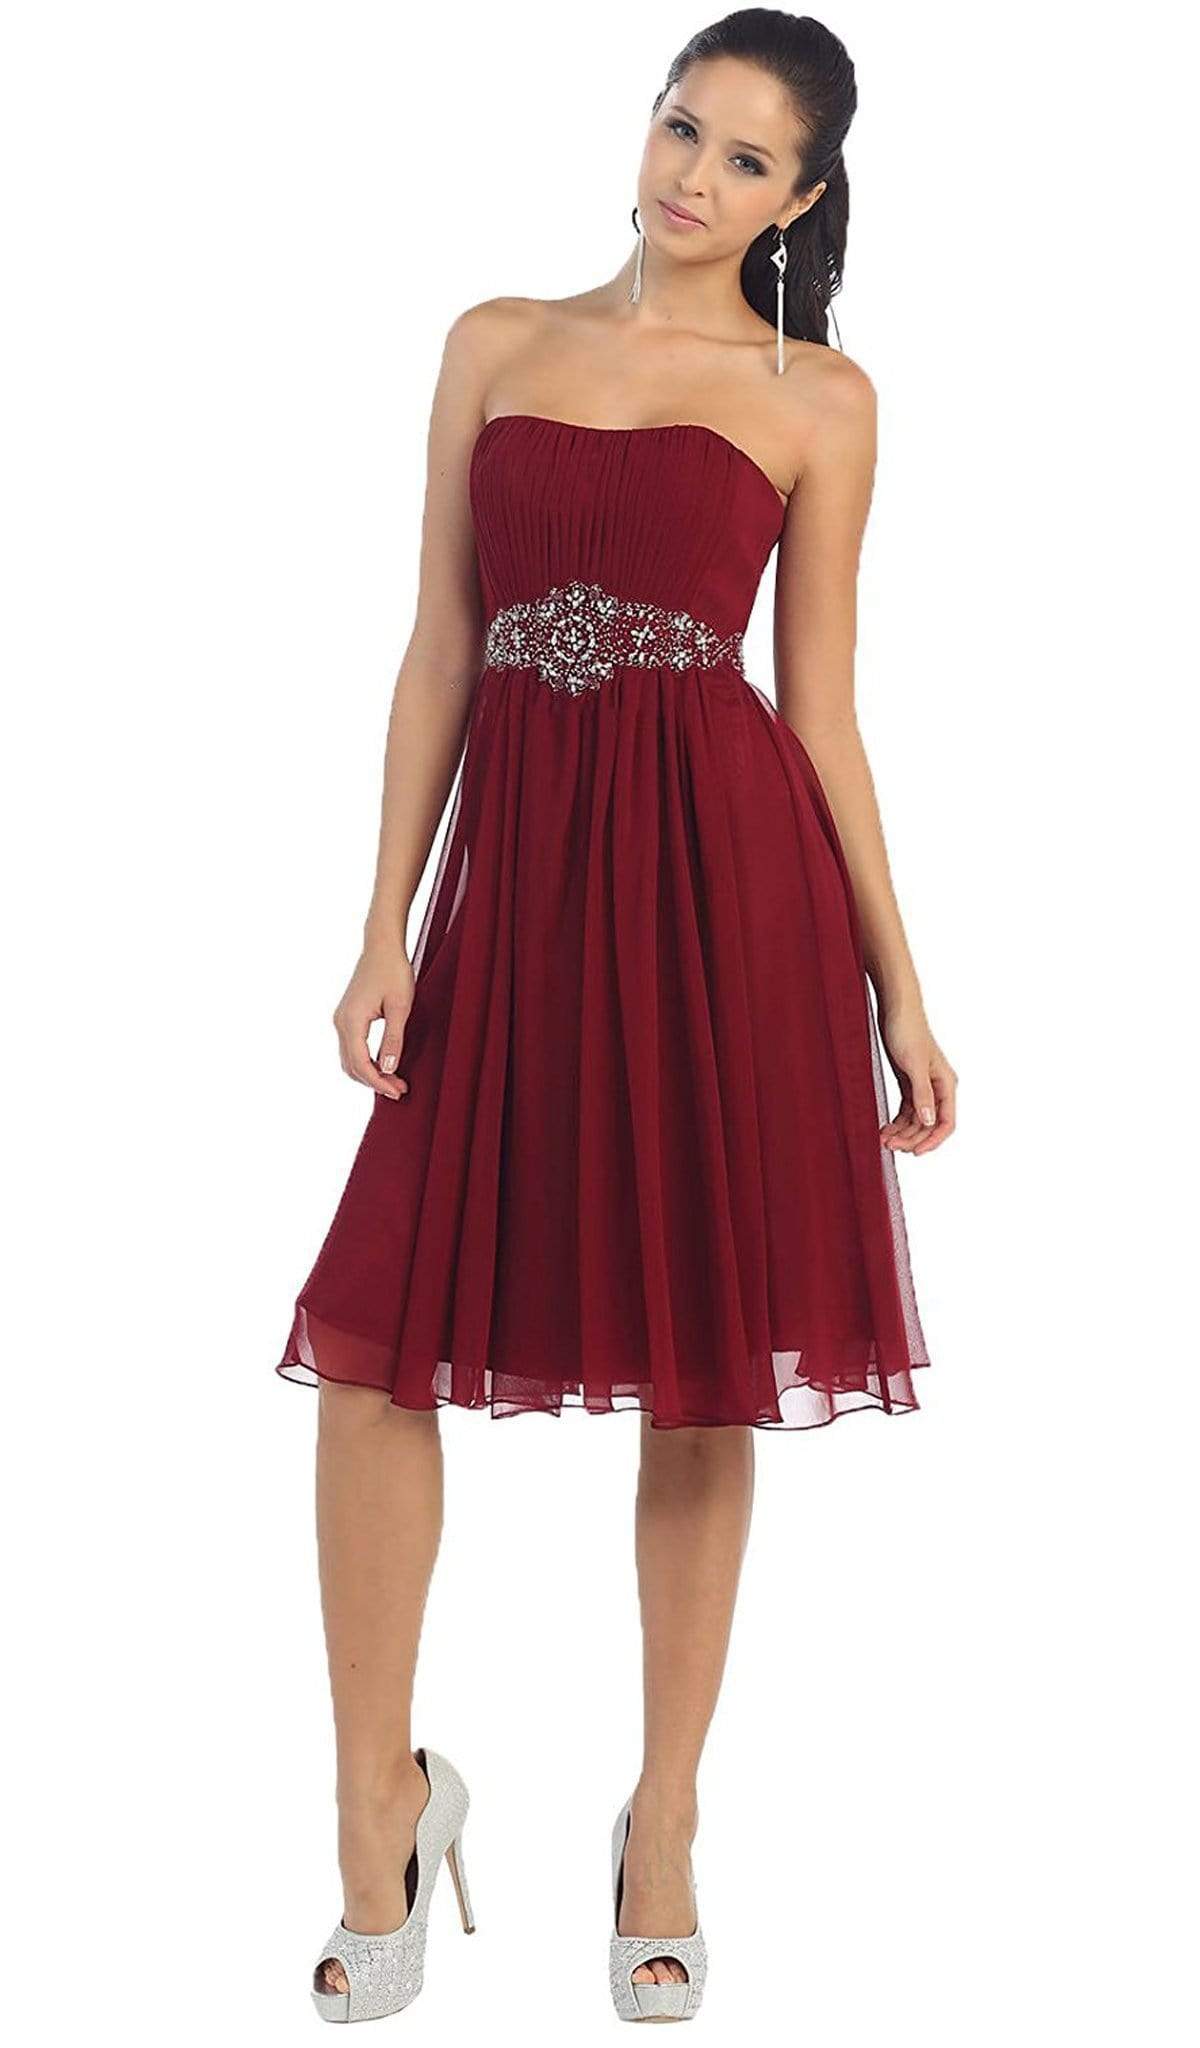 May Queen - MQ711B Pleated Sweetheart Bejeweled Waist Cocktail Dress Special Occasion Dress 22 / Burgundy